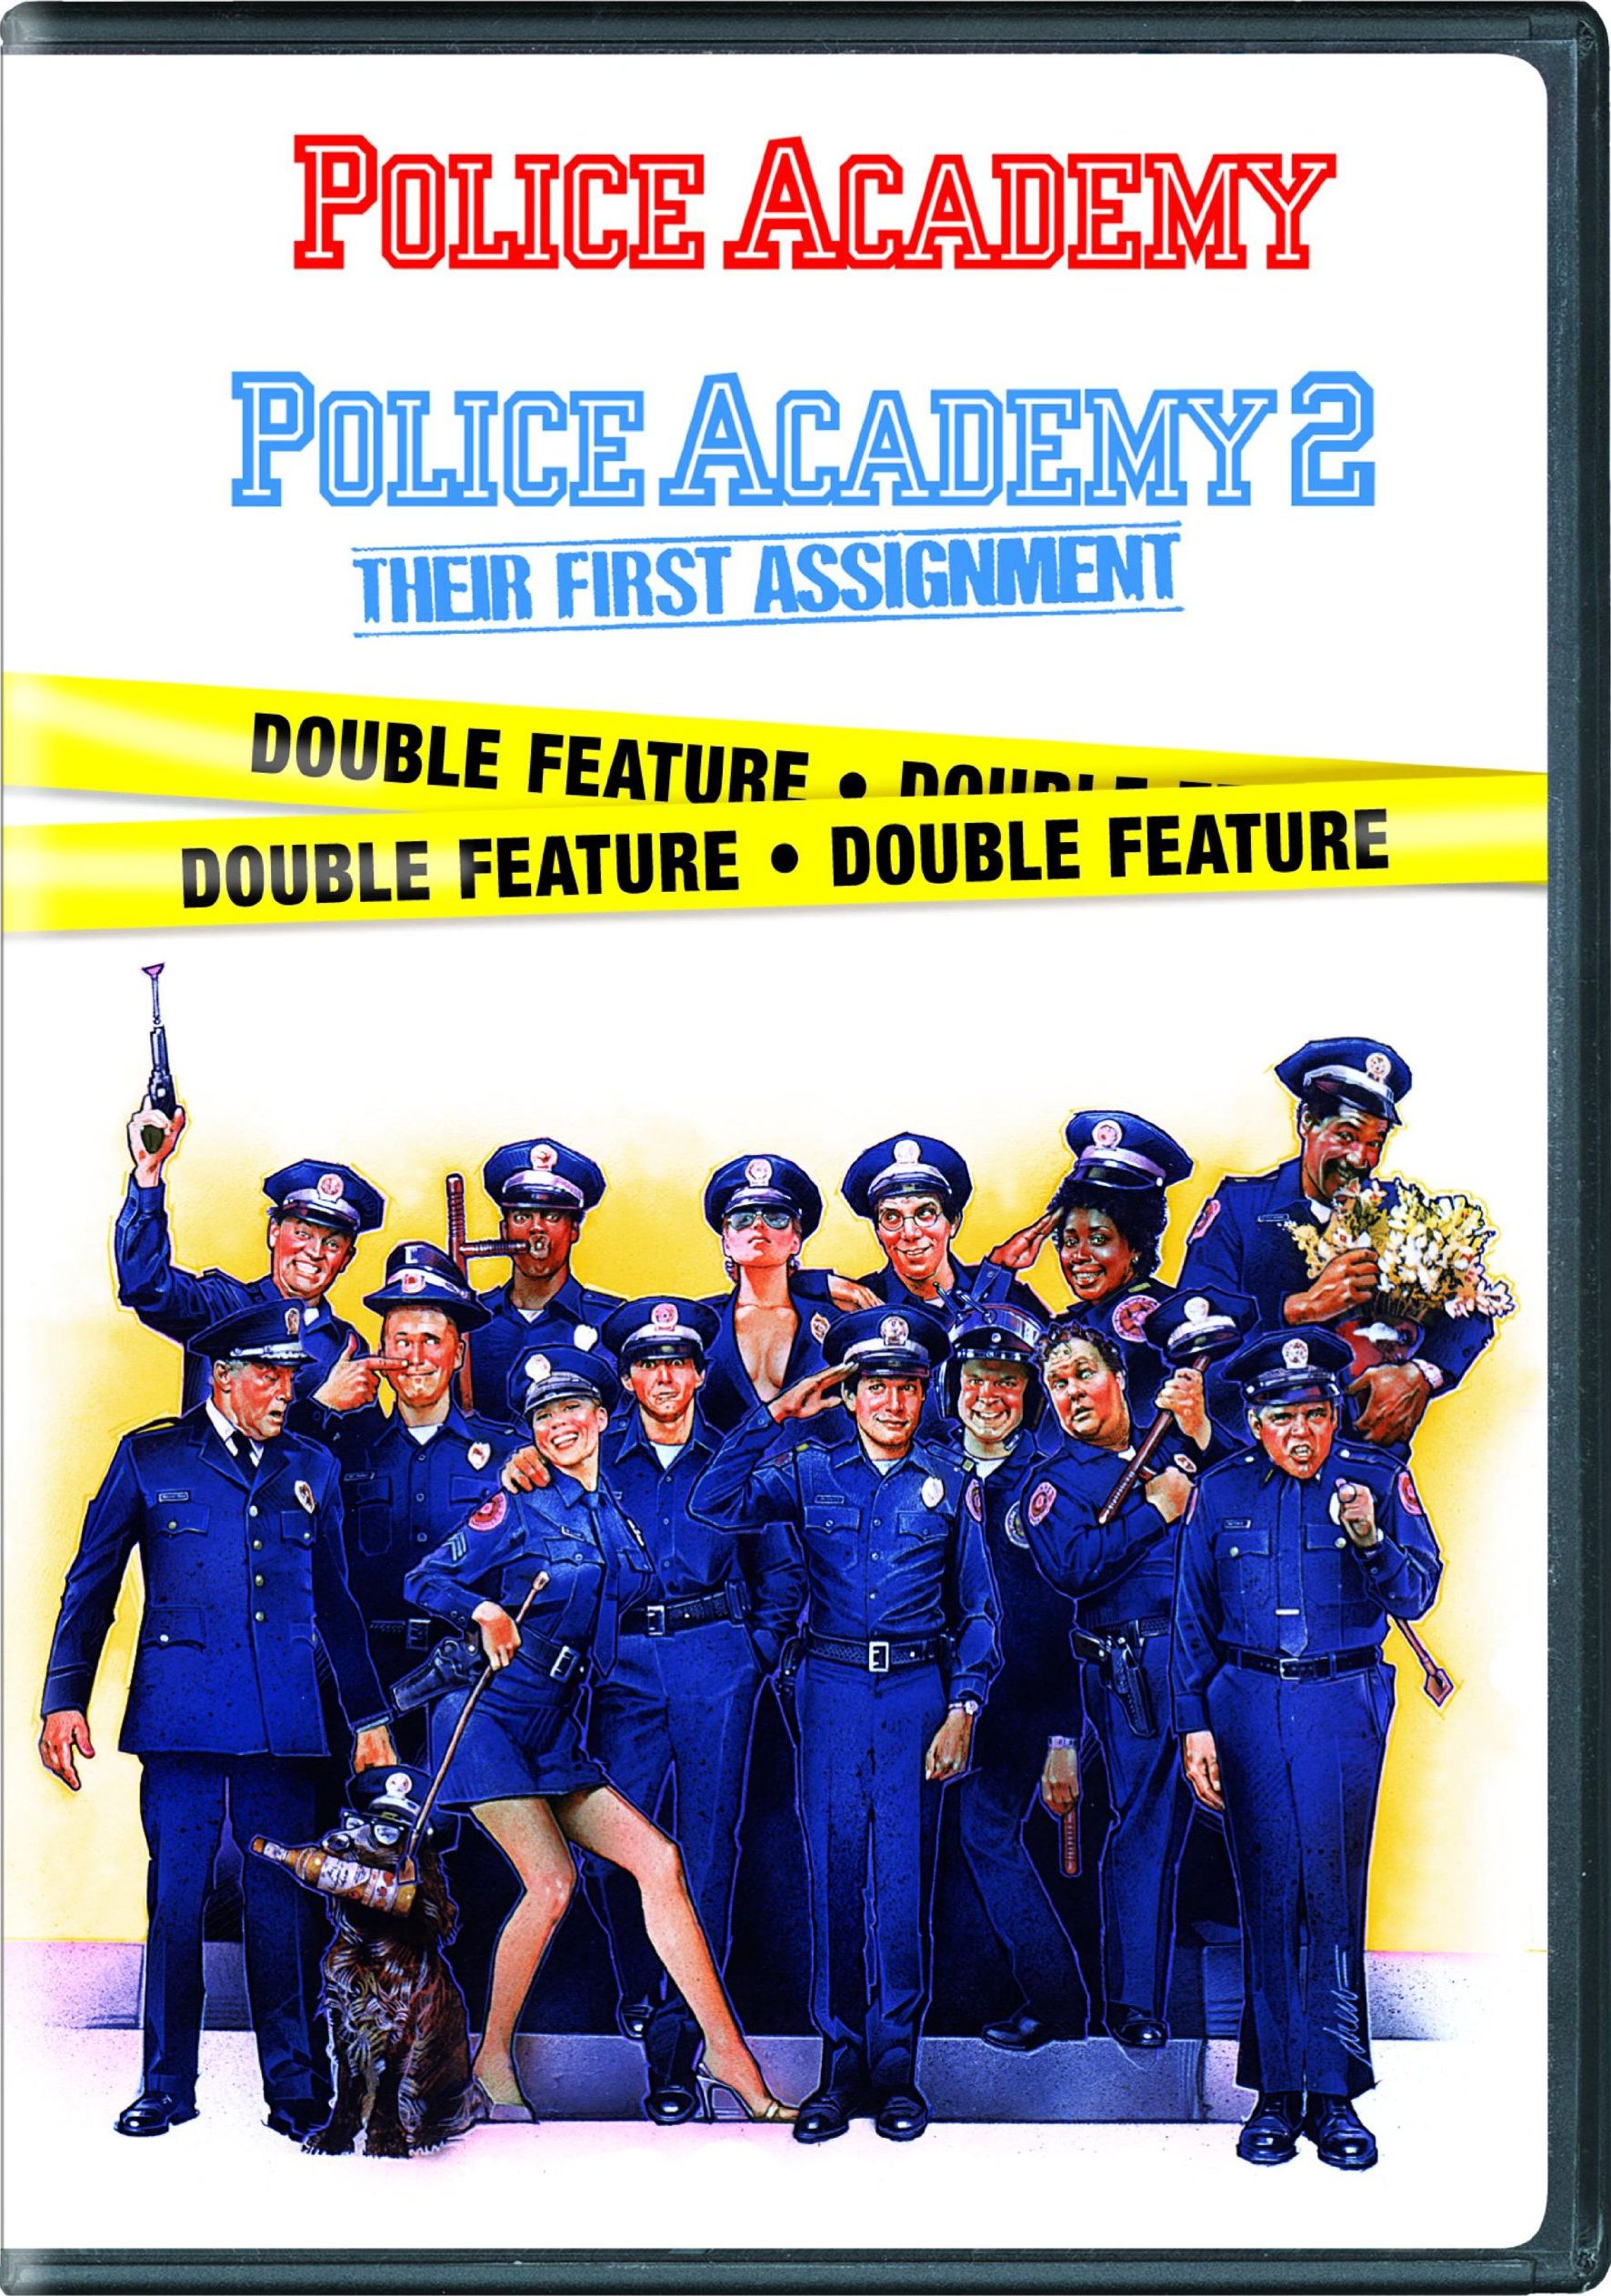 Police Academy 2: Their First Assignment wallpaper, Movie, HQ Police Academy 2: Their First Assignment pictureK Wallpaper 2019